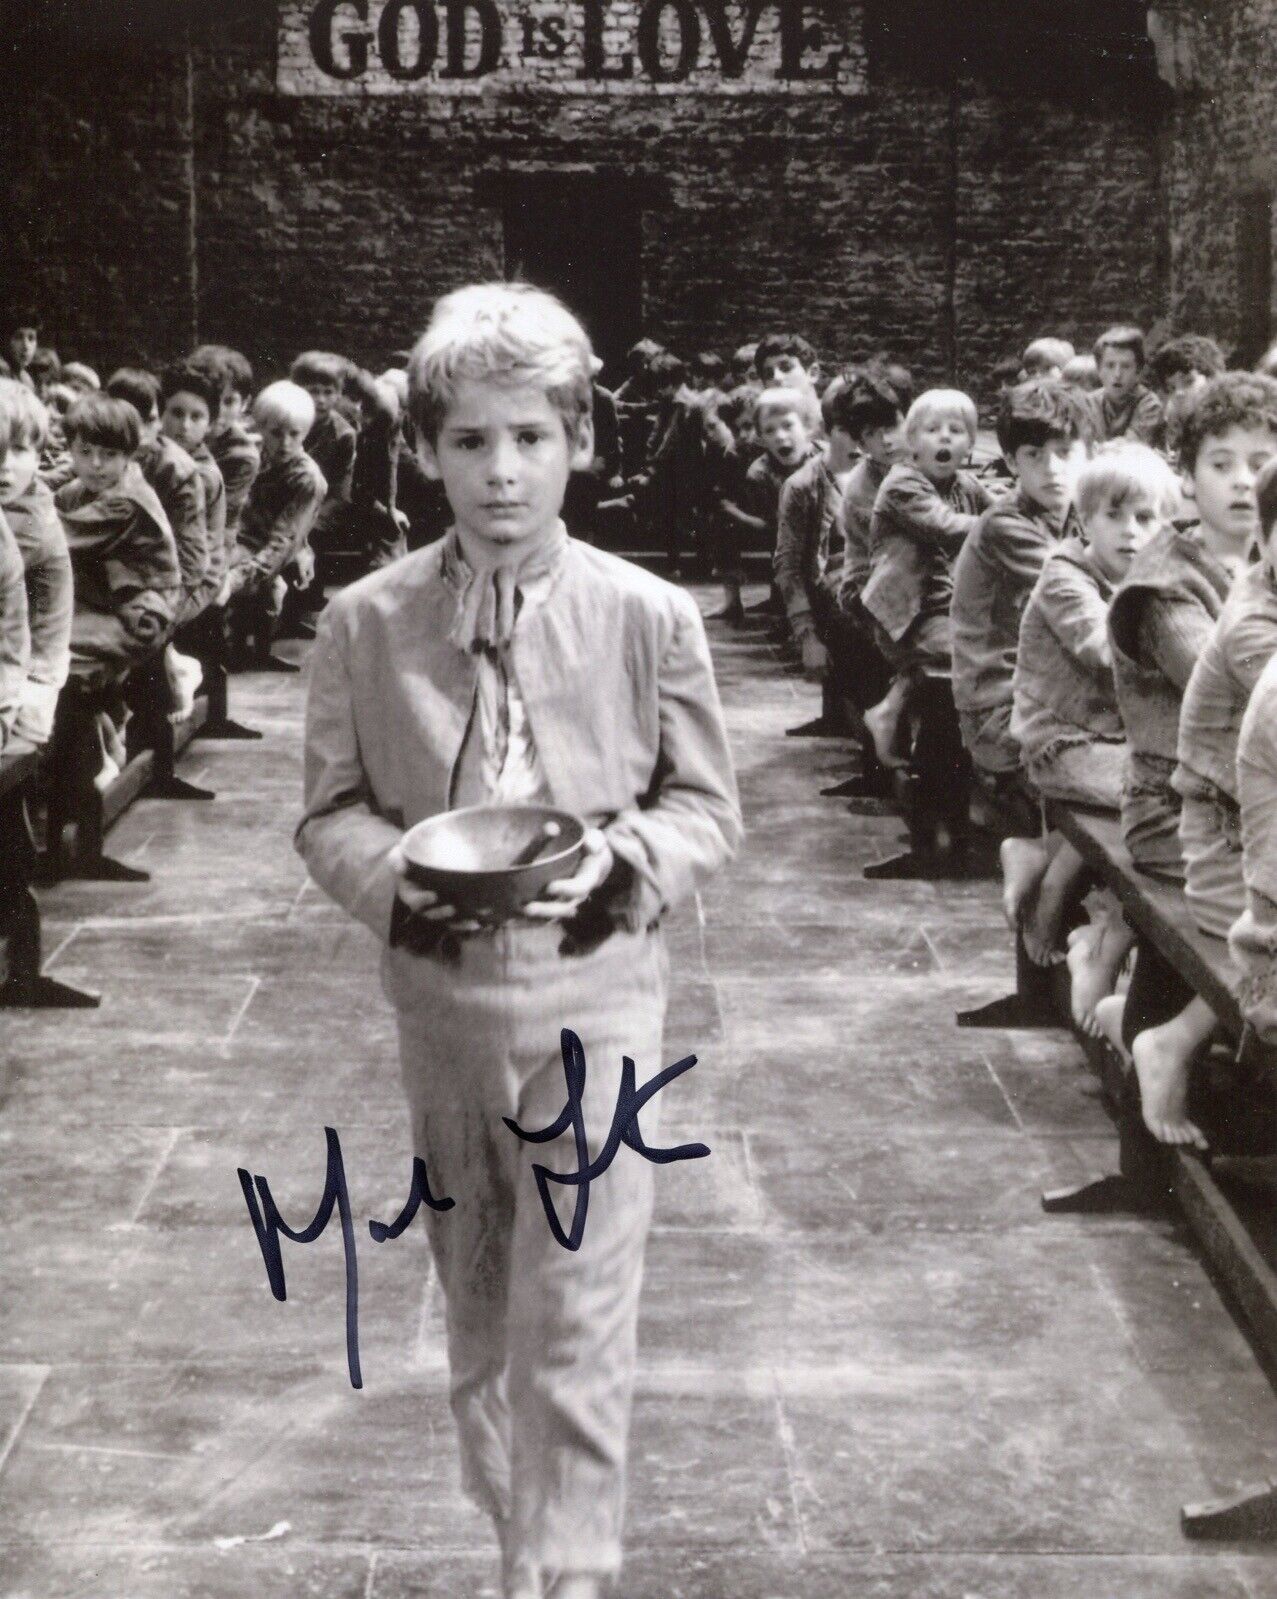 Oliver! movie 8x10 scene Photo Poster painting signed by actor Mark Lester IMAGE No5